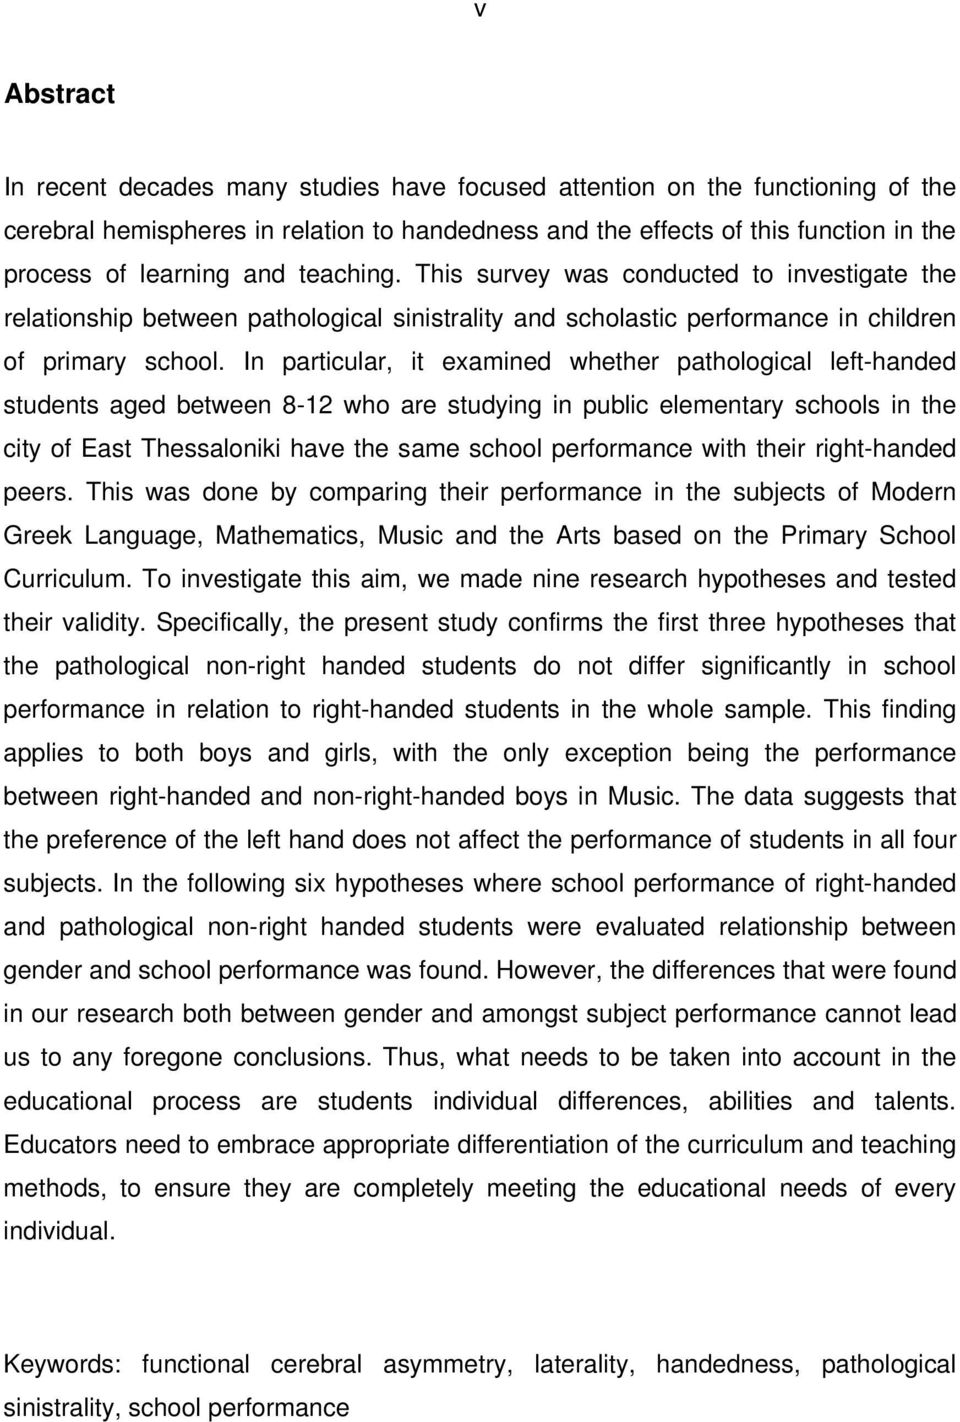 In particular, it examined whether pathological left-handed students aged between 8-12 who are studying in public elementary schools in the city of East Thessaloniki have the same school performance